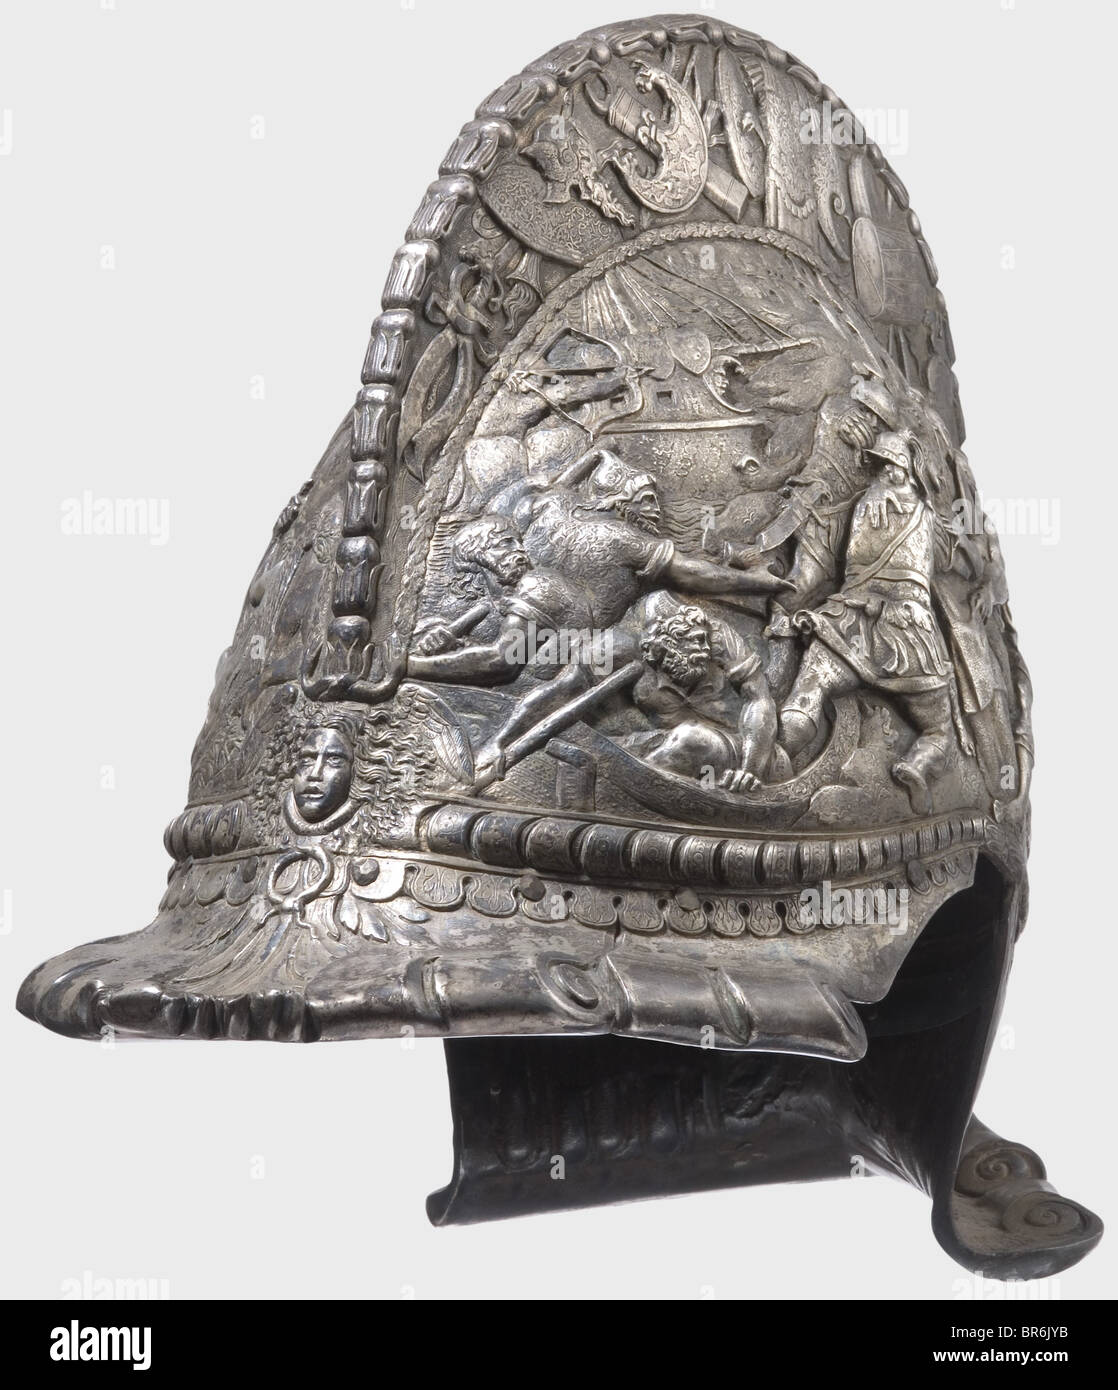 A silver-plated ceremonial helmet, in the style of the 16th century. Silver electroplated on copper. Made in one piece with a high comb and turned under, hollow-worked visor and neck guard. A depiction of the Judgement of Paris in half-relief on one side and one of the Abduction of Helen on the other. Each face of the comb displays trophies of war in relief. Very decorative helmet. Height 28.5 cm. historic, historical, 16th century, defensive arms, weapons, arms, weapon, arm, fighting device, object, objects, stills, clipping, clippings, cut out, cut-out, cut-o, Stock Photo